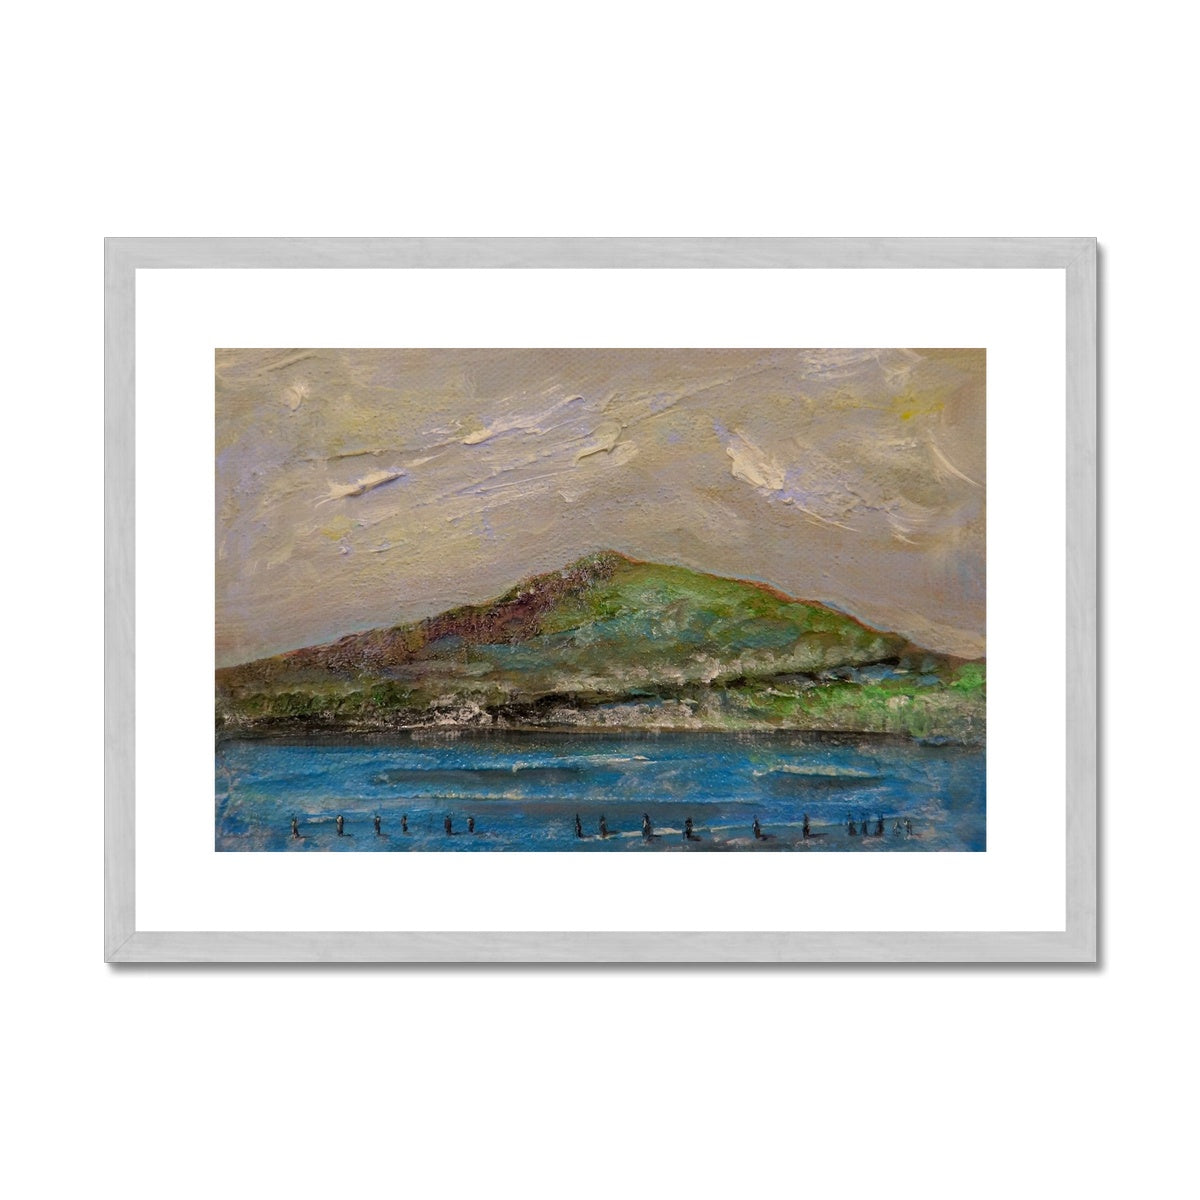 Ben Lomond iii Painting | Antique Framed & Mounted Prints From Scotland-Antique Framed & Mounted Prints-Scottish Lochs & Mountains Art Gallery-A2 Landscape-Silver Frame-Paintings, Prints, Homeware, Art Gifts From Scotland By Scottish Artist Kevin Hunter